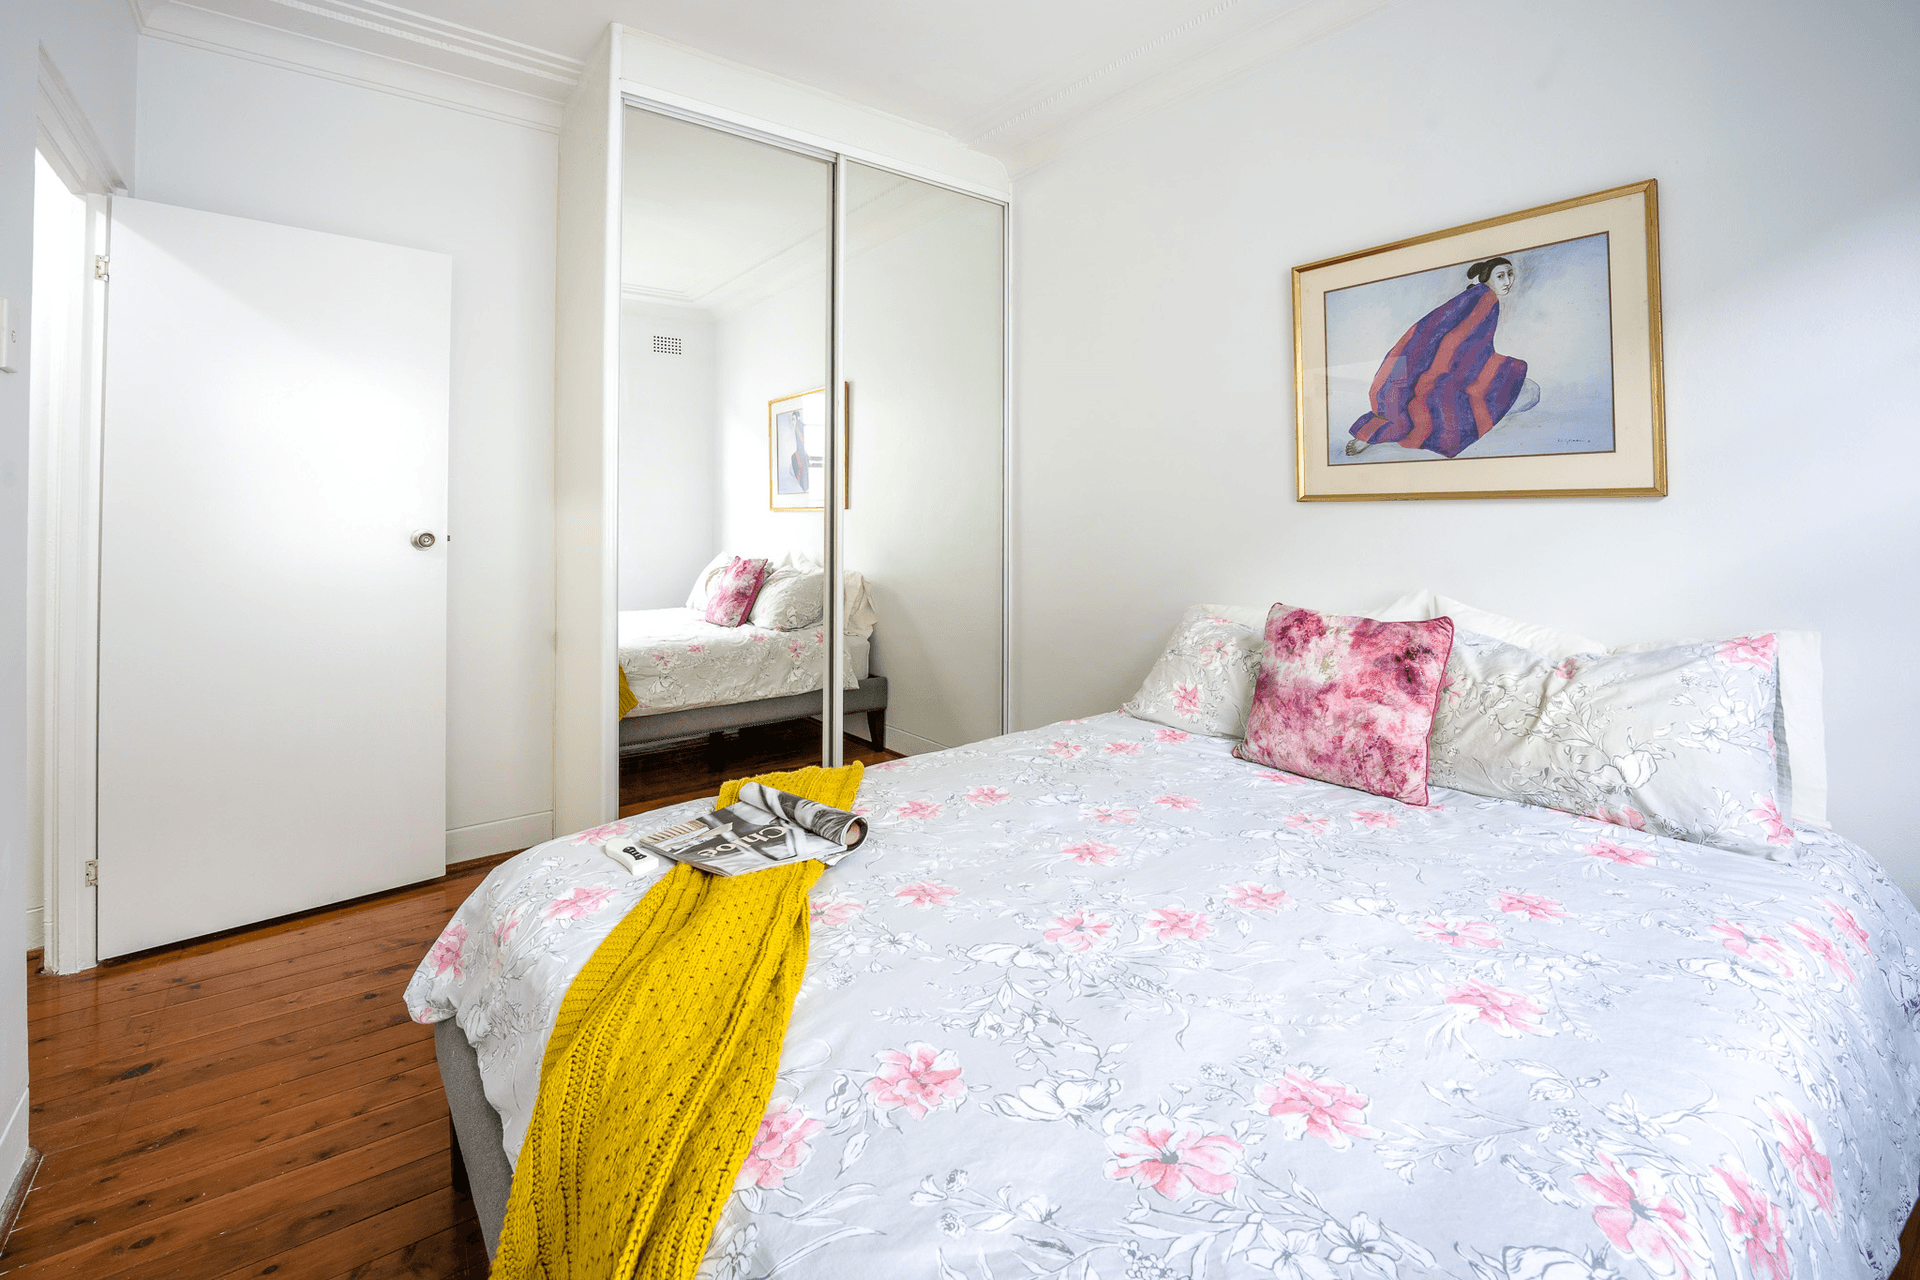 15/101 New South Head Road, Edgecliff, NSW 2027